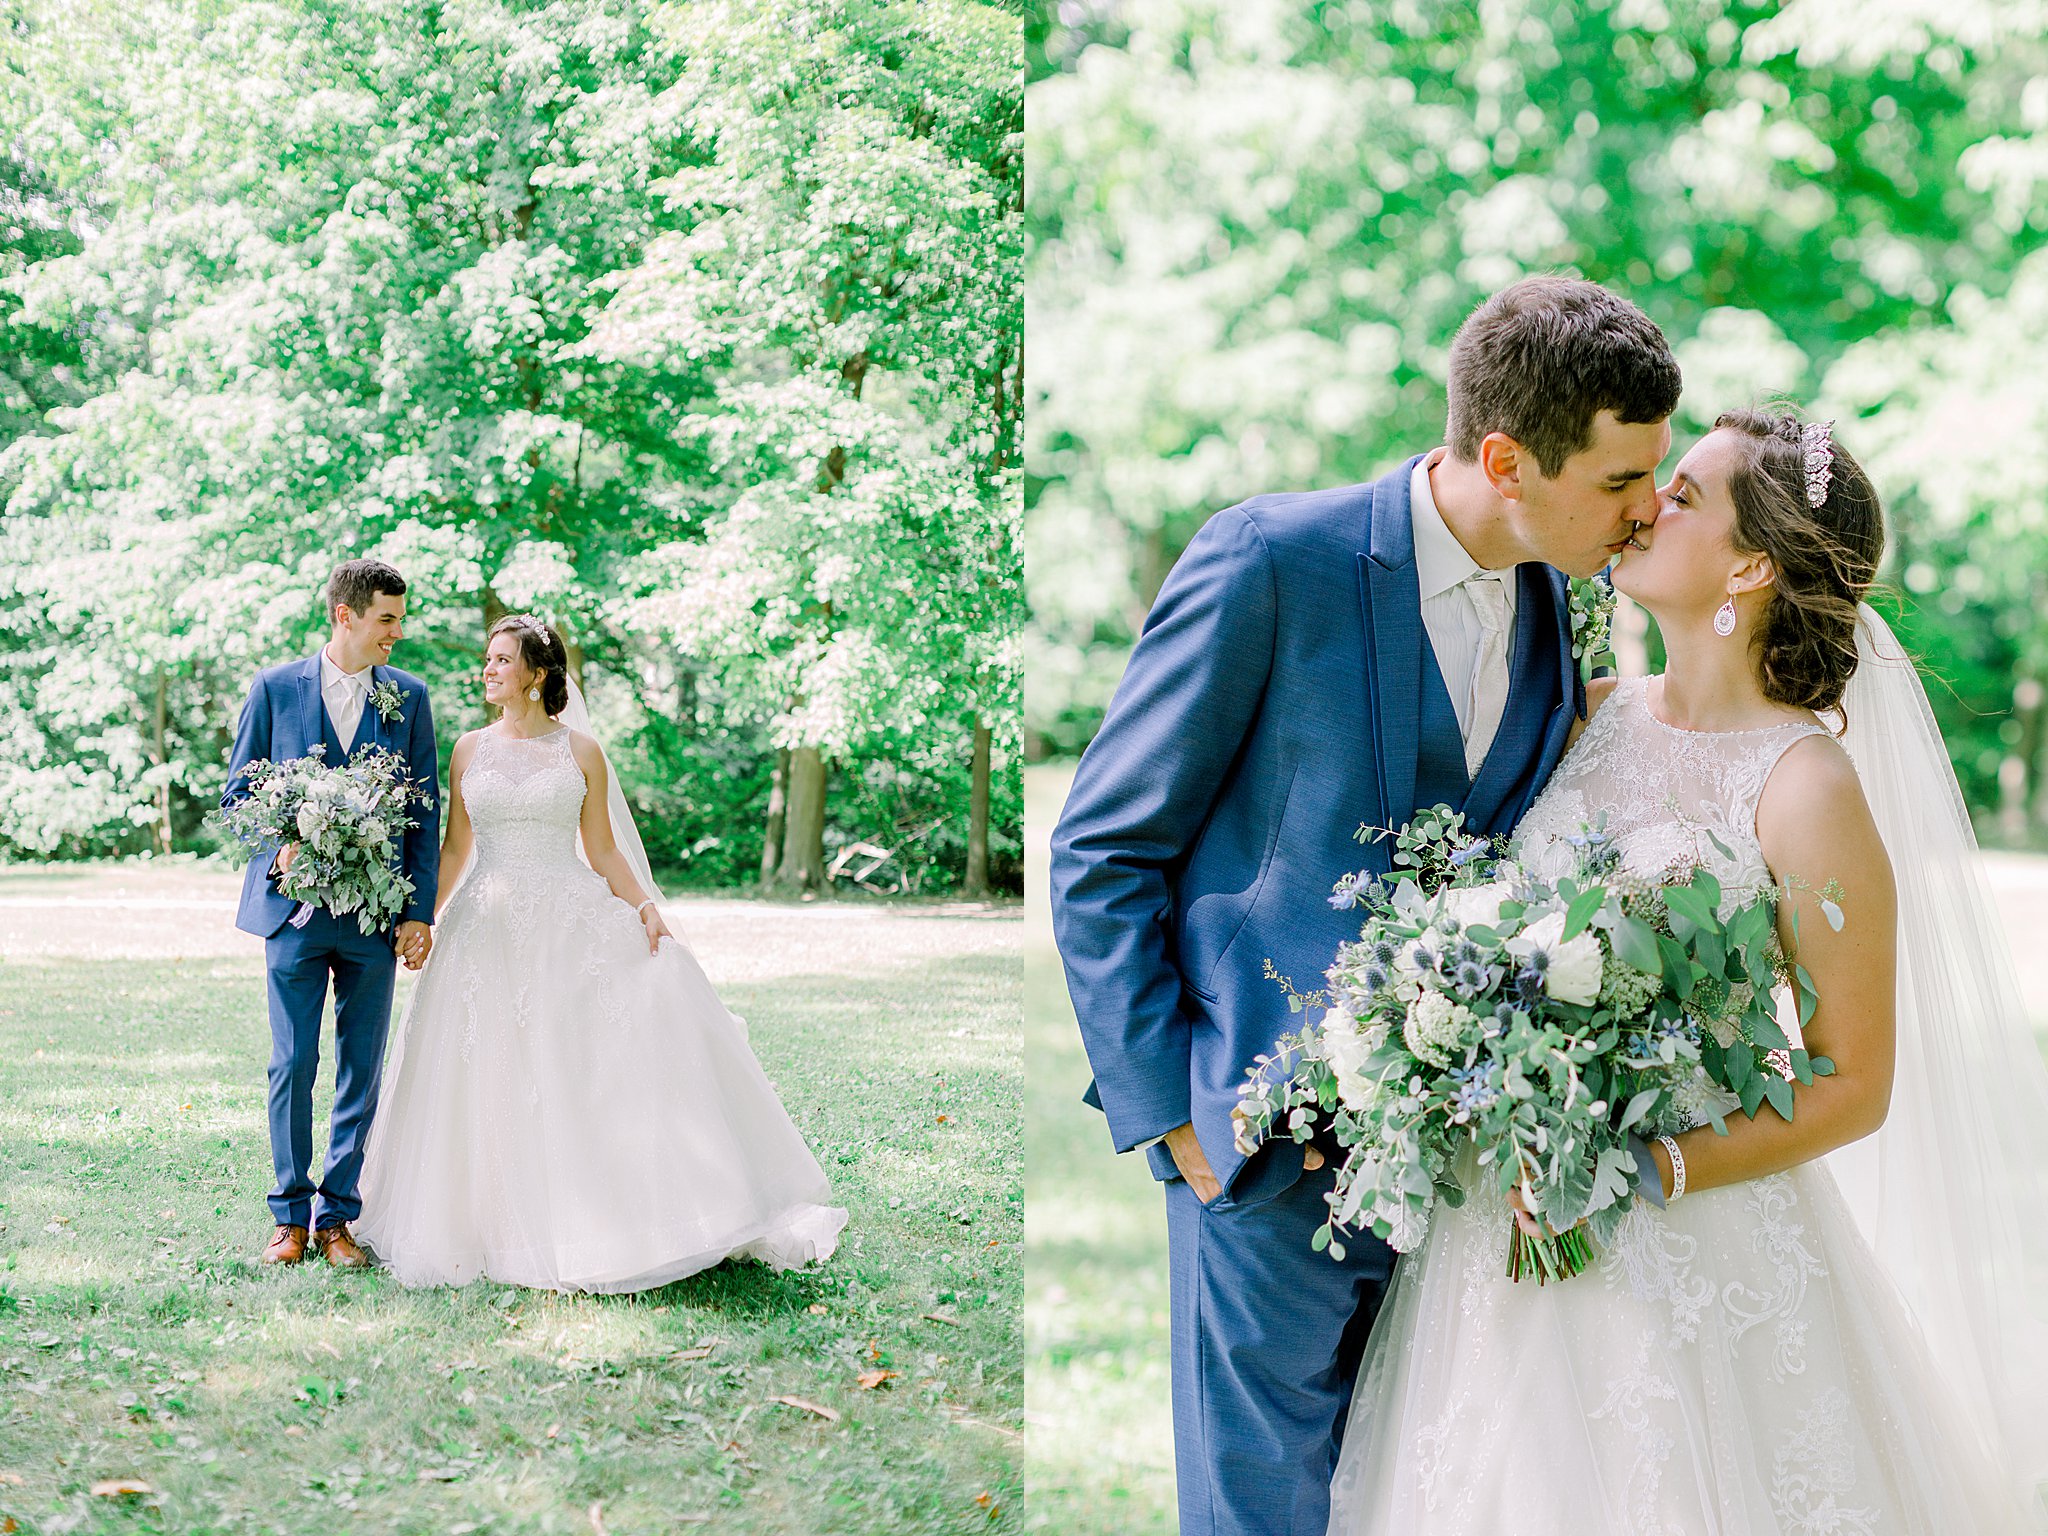 Bride and groom walk hand in hand during Michigan July wedding and share a kiss.